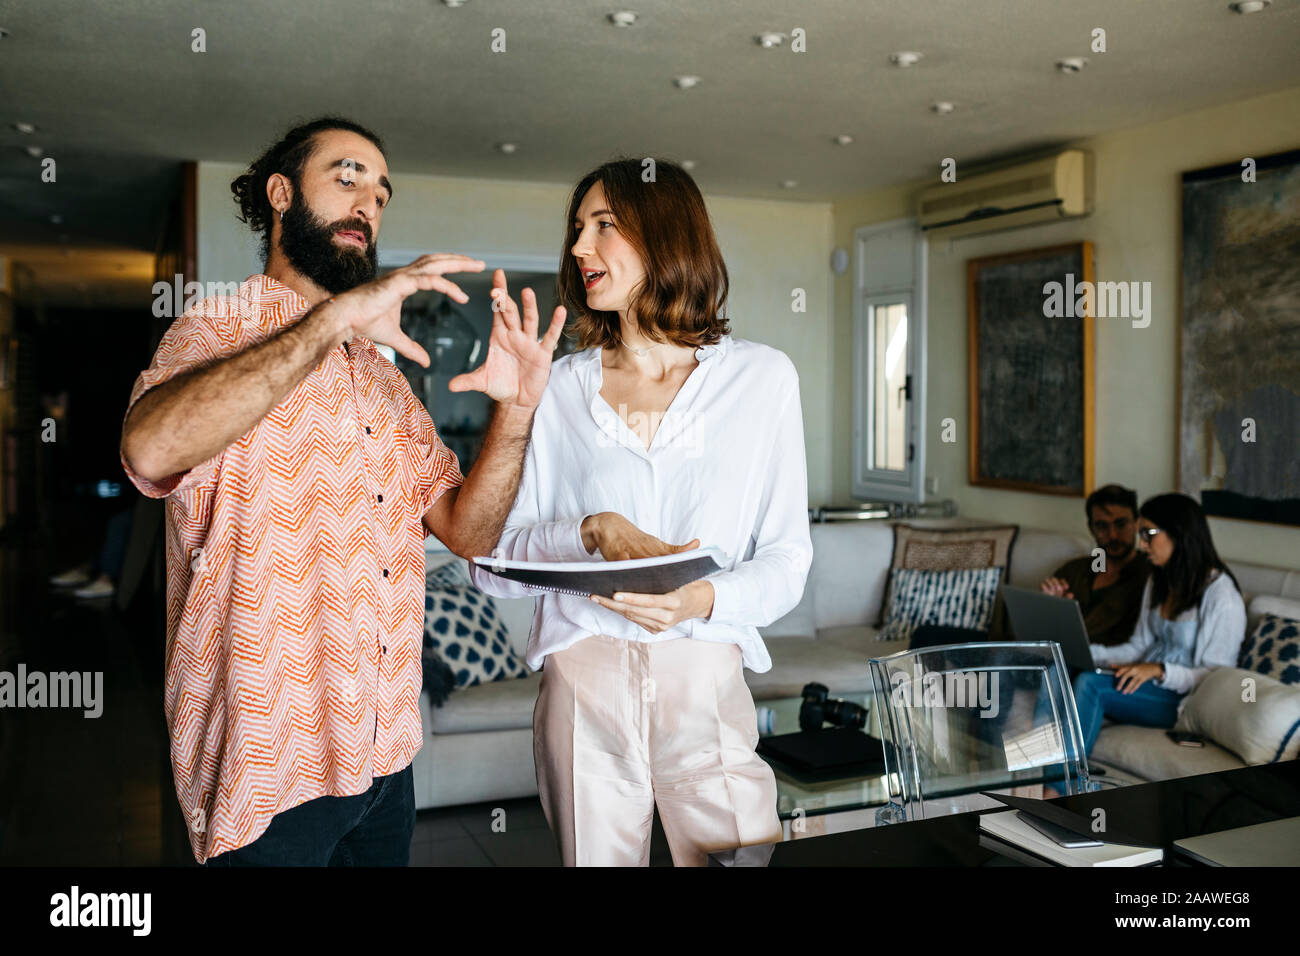 Man and woman talking with friends sitting on couch in background Stock Photo